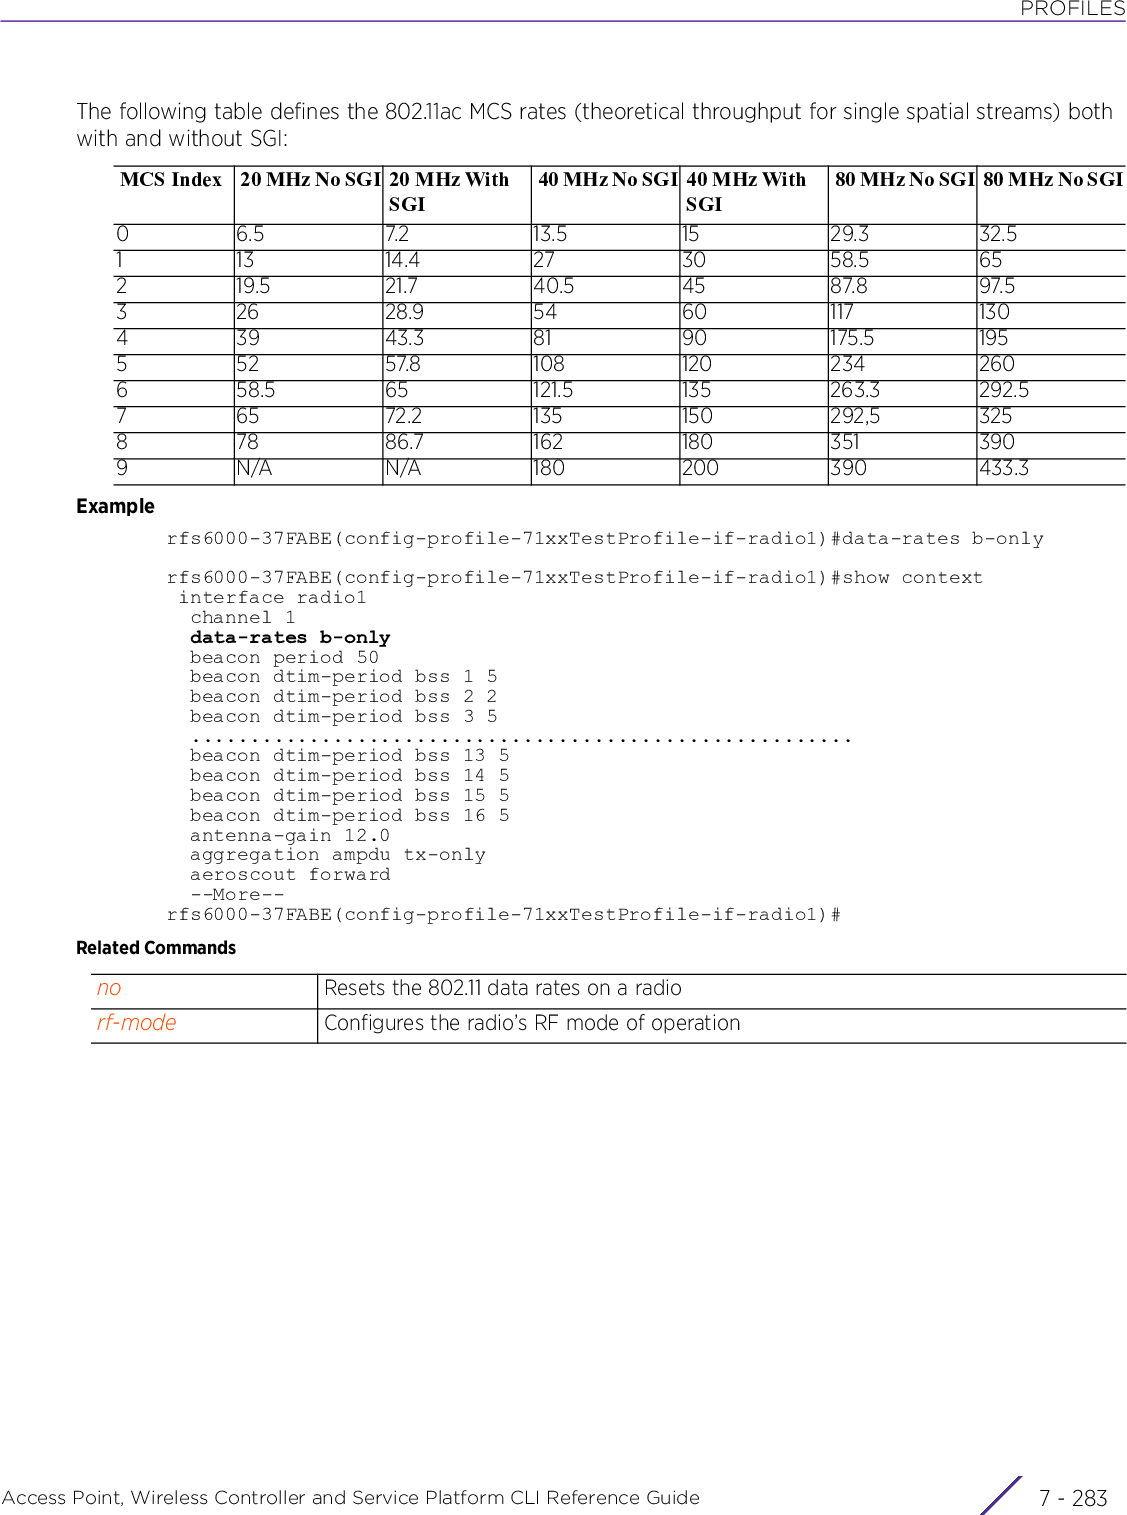 PROFILESAccess Point, Wireless Controller and Service Platform CLI Reference Guide 7 - 283The following table defines the 802.11ac MCS rates (theoretical throughput for single spatial streams) both with and without SGI:Examplerfs6000-37FABE(config-profile-71xxTestProfile-if-radio1)#data-rates b-onlyrfs6000-37FABE(config-profile-71xxTestProfile-if-radio1)#show context interface radio1  channel 1  data-rates b-only  beacon period 50  beacon dtim-period bss 1 5  beacon dtim-period bss 2 2  beacon dtim-period bss 3 5  ........................................................  beacon dtim-period bss 13 5  beacon dtim-period bss 14 5  beacon dtim-period bss 15 5  beacon dtim-period bss 16 5  antenna-gain 12.0  aggregation ampdu tx-only  aeroscout forward  --More--rfs6000-37FABE(config-profile-71xxTestProfile-if-radio1)#Related CommandsMCS Index 20 MHz No SGI 20 MHz With SGI40 MHz No SGI 40 MHz With SGI80 MHz No SGI 80 MHz No SGI06.5 7.2 13.5 15 29.332.5113 14.427 30 58.5652 19.5 21.7 40.5 45 87.8 97.53 26 28.9 54 60 117 130439 43.381 90 175.5195552 57.8 108 120 234 2606 58.5 65 121.5 135 263.3 292.5765 72.2135 150 292,53258 78 86.7 162 180 351 3909N/A N/A 180 200390 433.3no Resets the 802.11 data rates on a radiorf-mode Configures the radio’s RF mode of operation